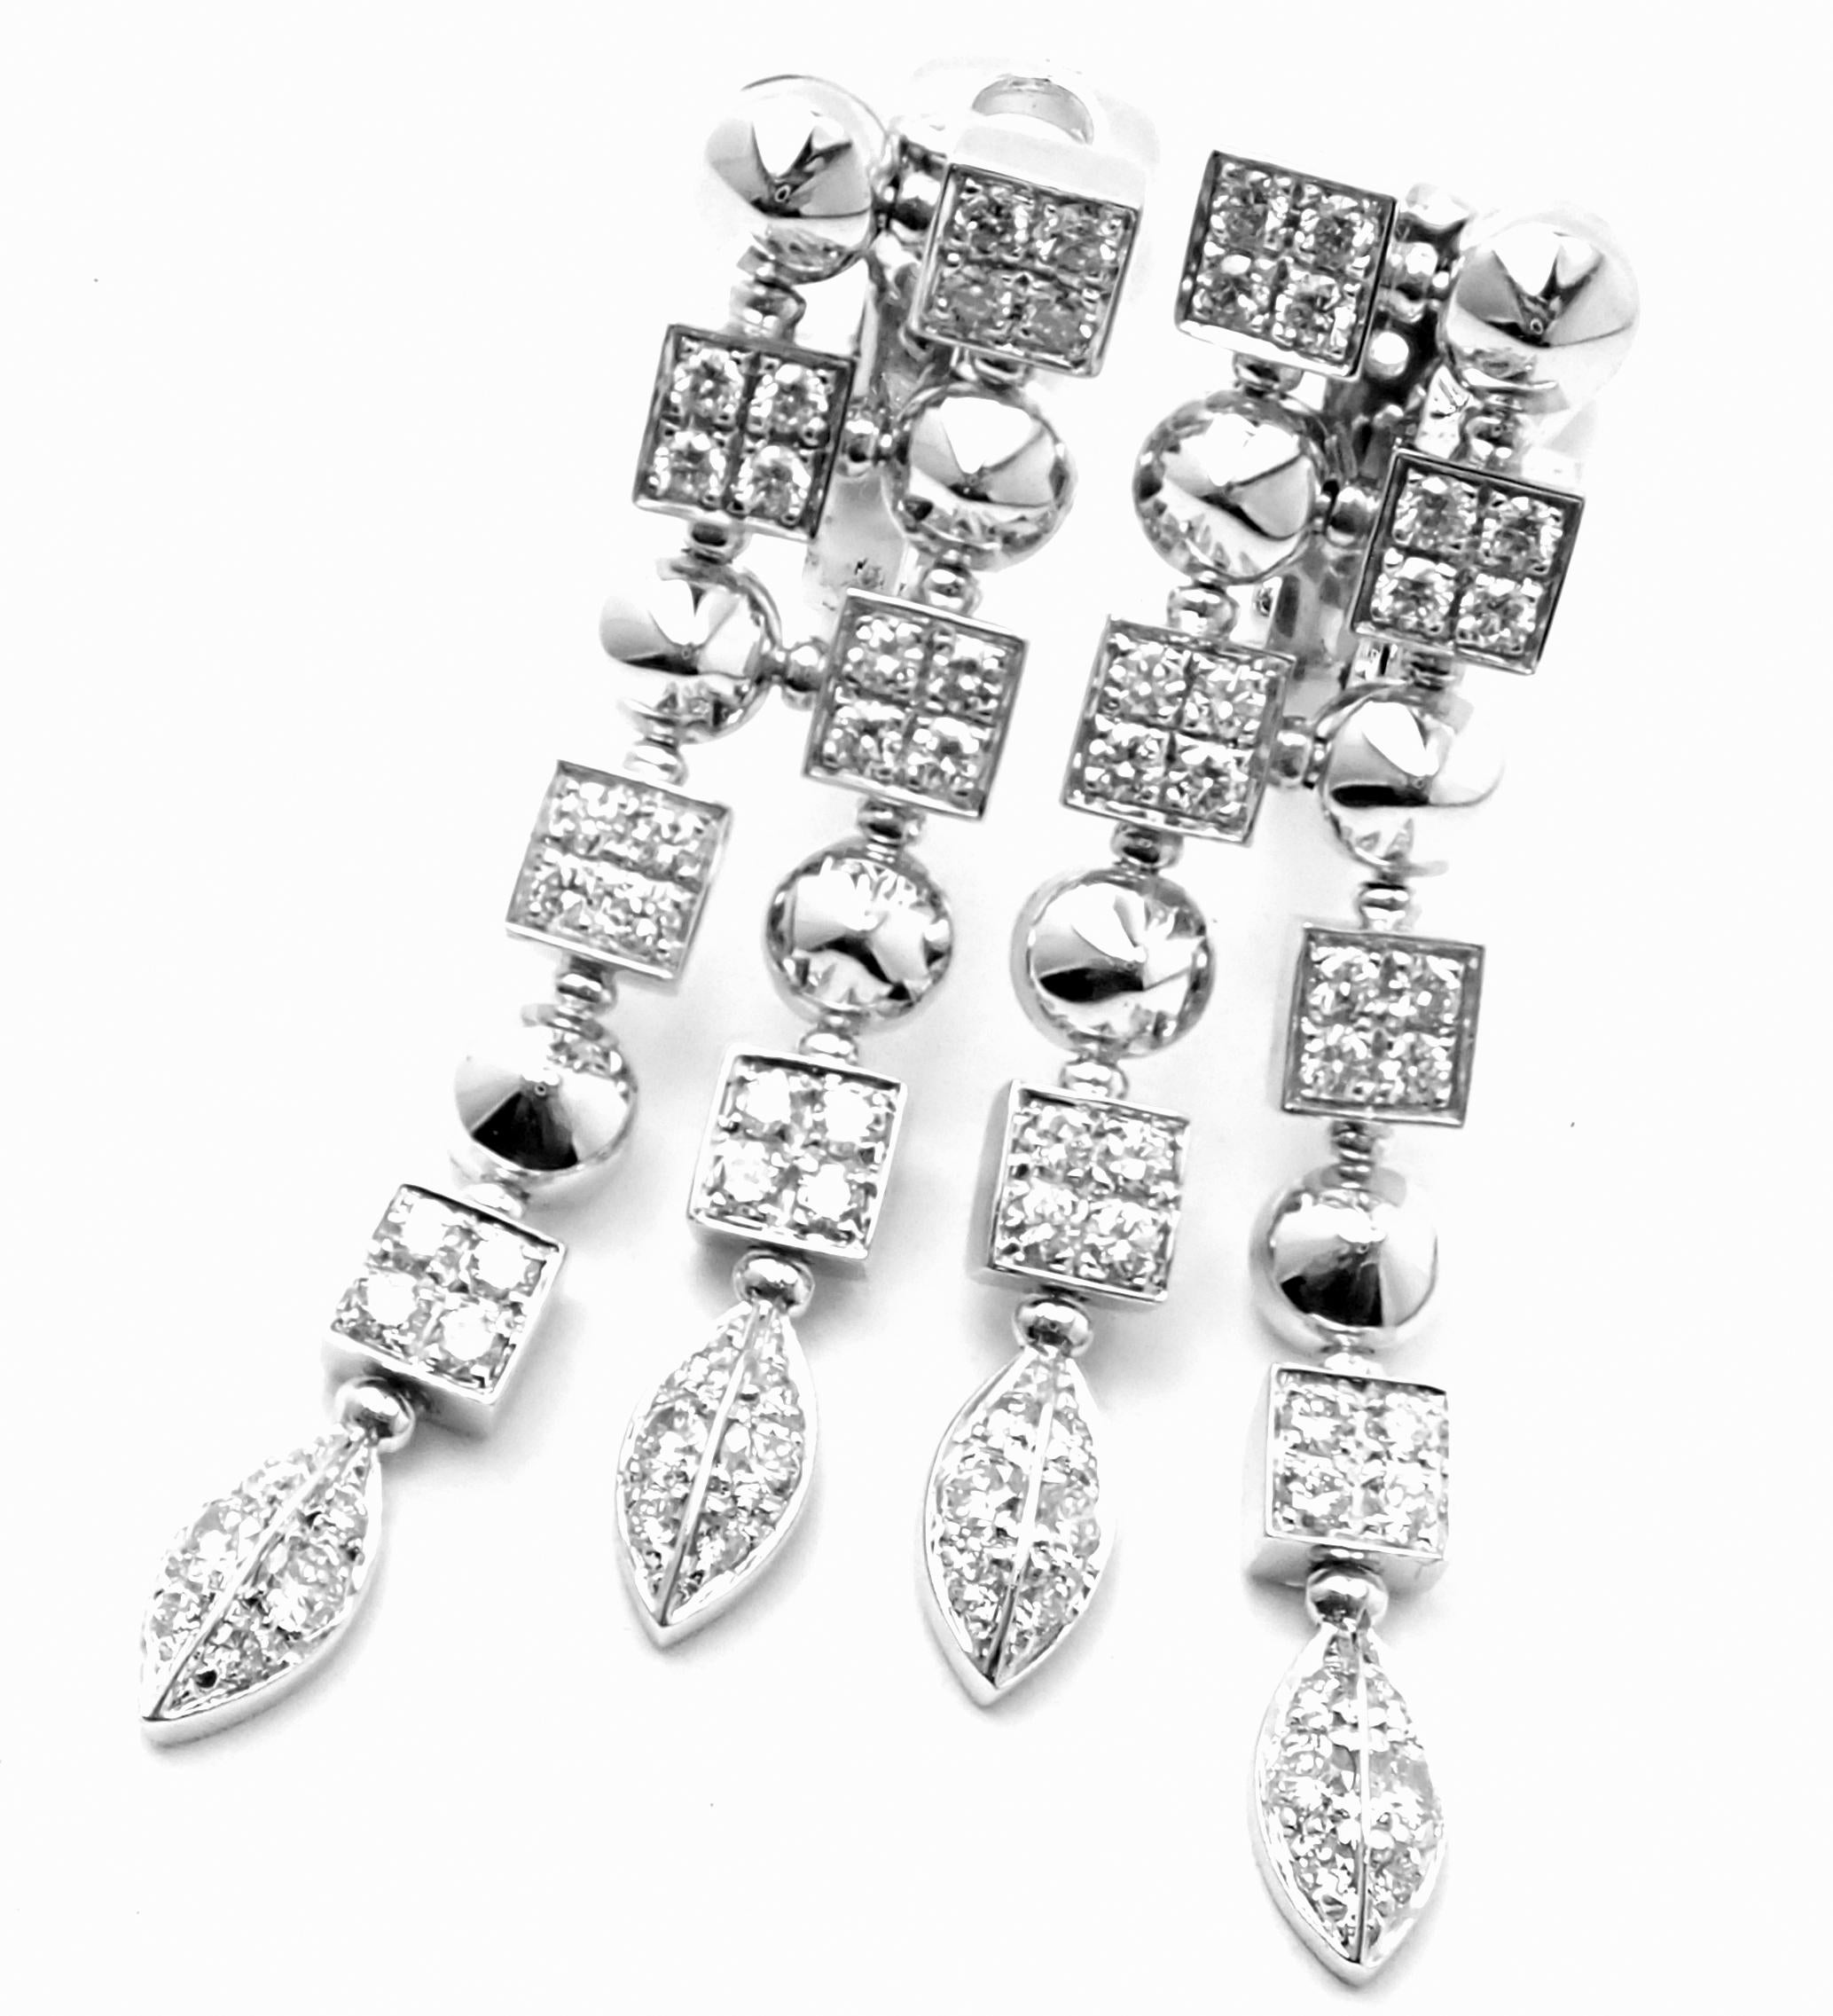 18k White Gold Diamond Lucea Long Drop Earrings by Bulgari. 
72 round brilliant cut diamonds VS1clarity, G color total weight approximately 1.83ct
******* These earrings are made for non pierced ears, but they can be converted by adding